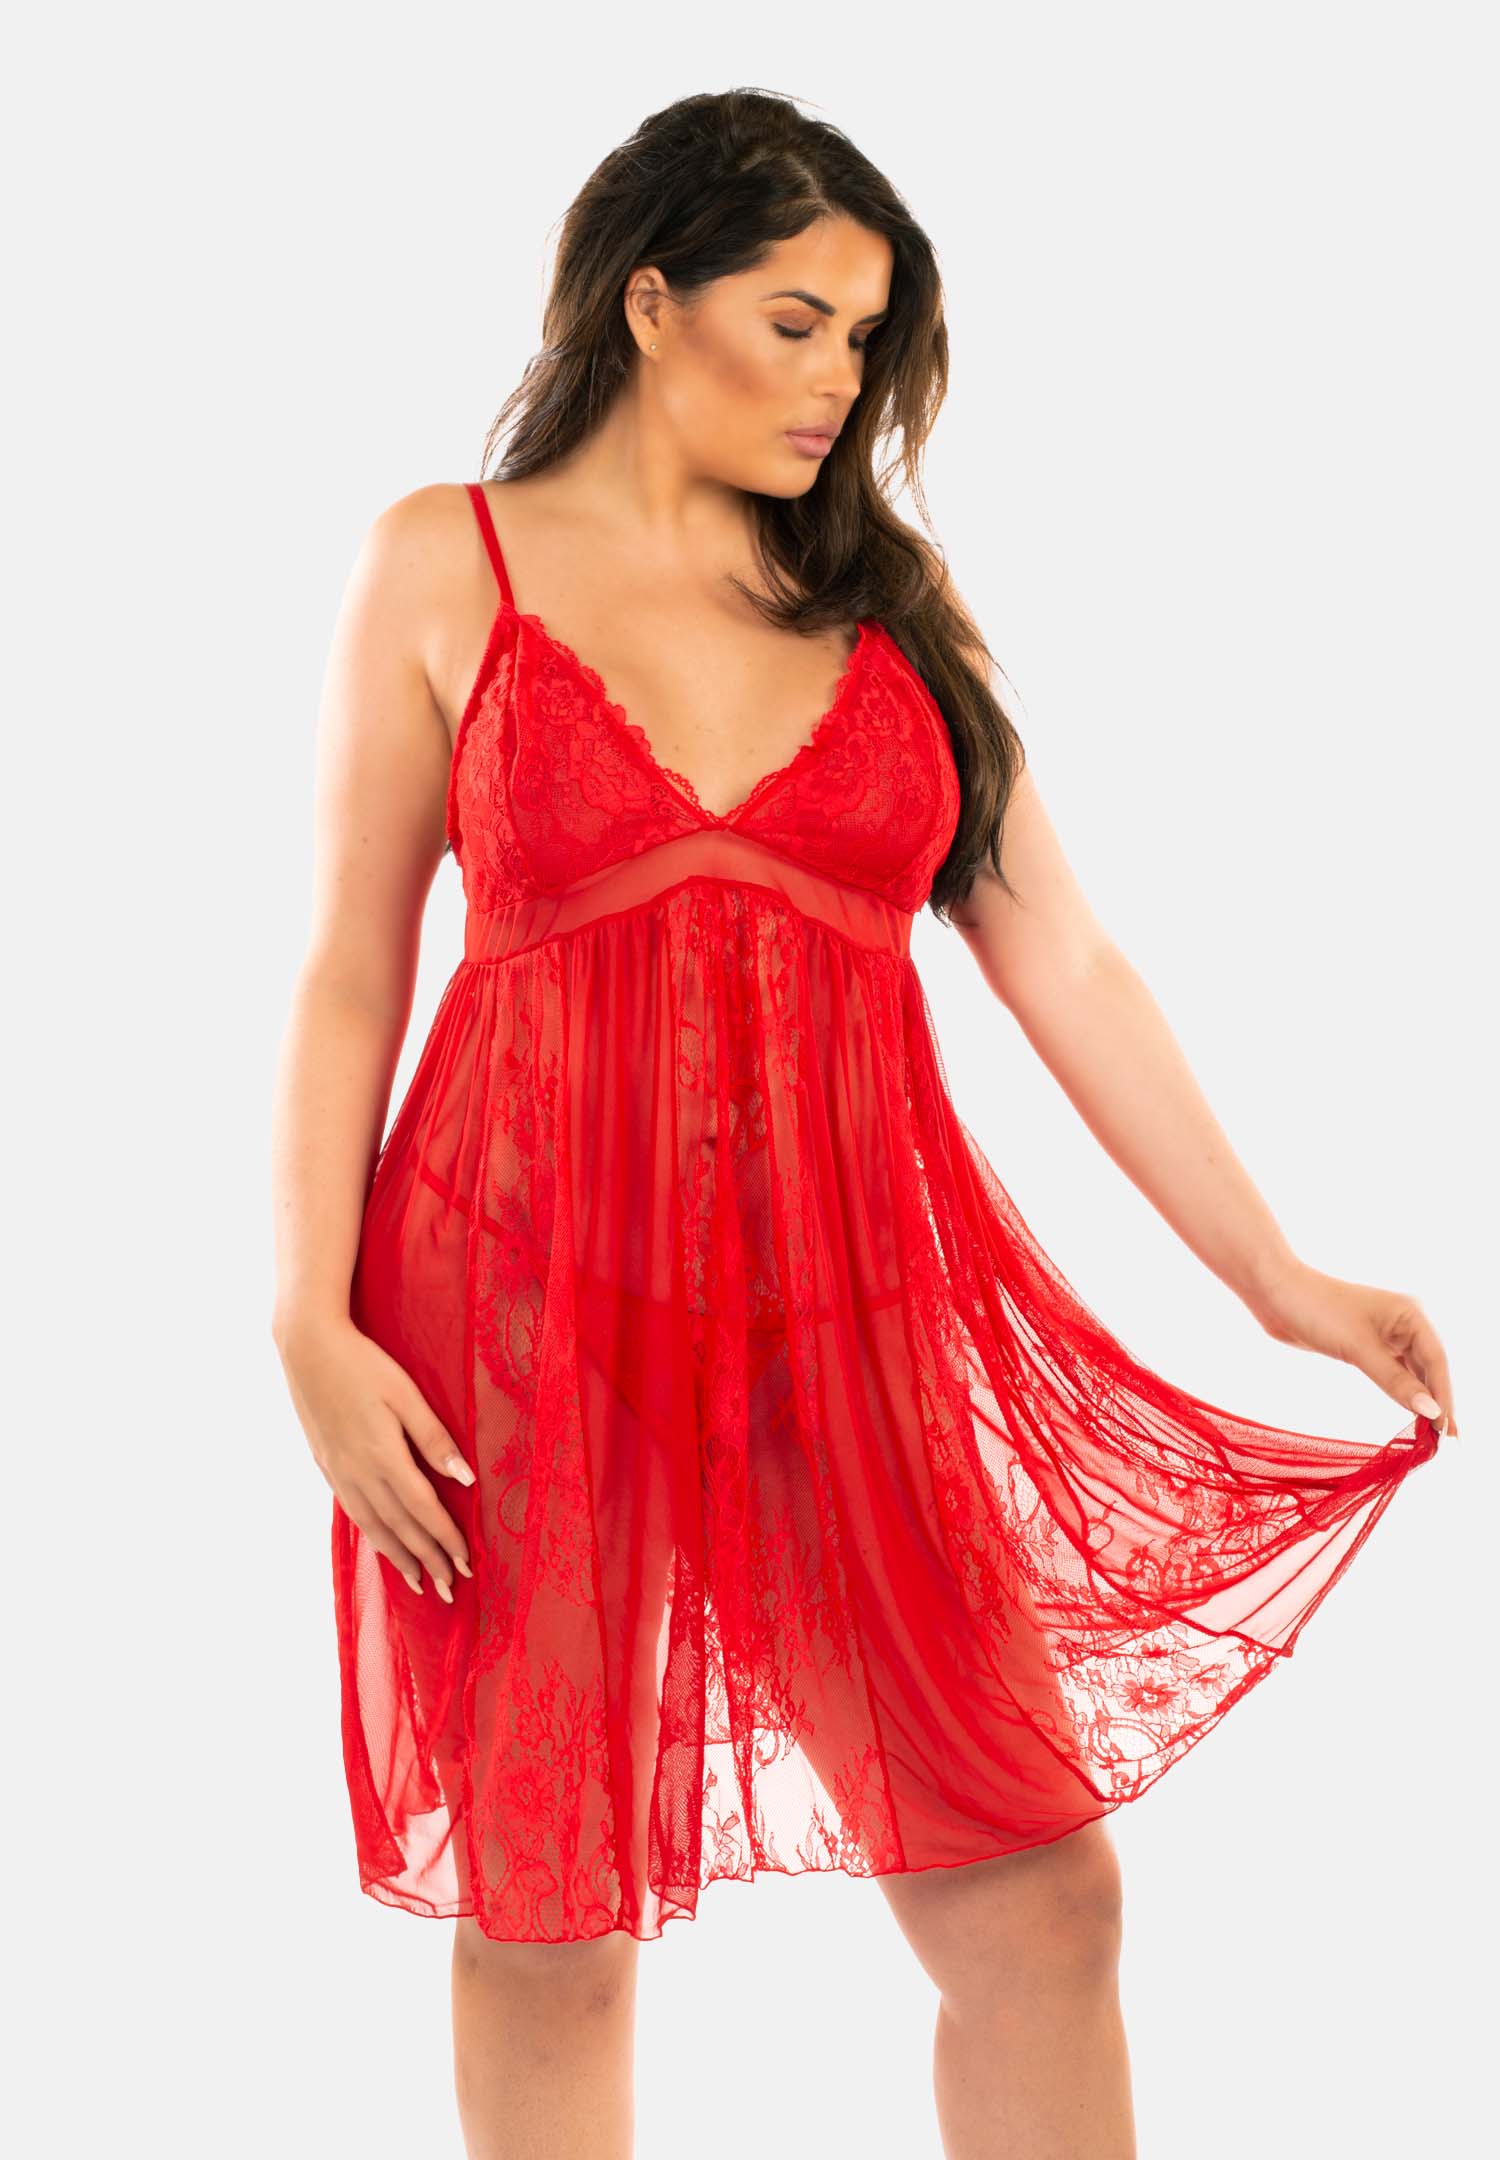 Isie Fab Red Lace & Mesh Nightwear with Matching Thong